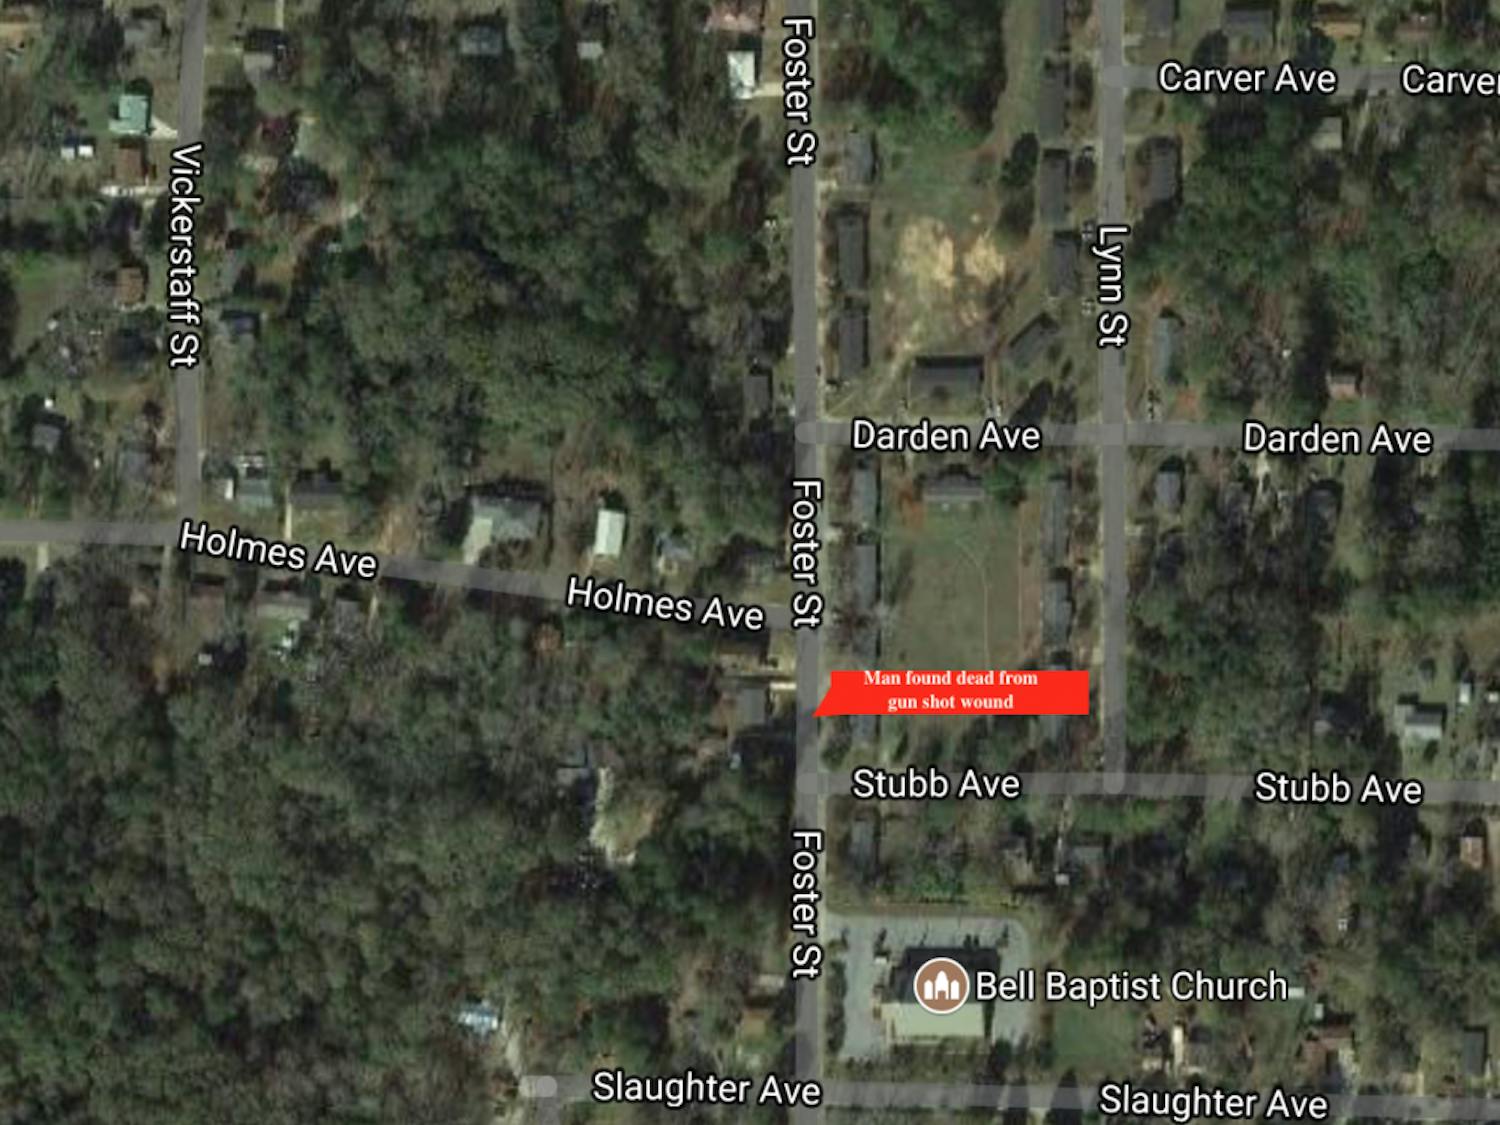 Location of shooting (500 block of foster street)